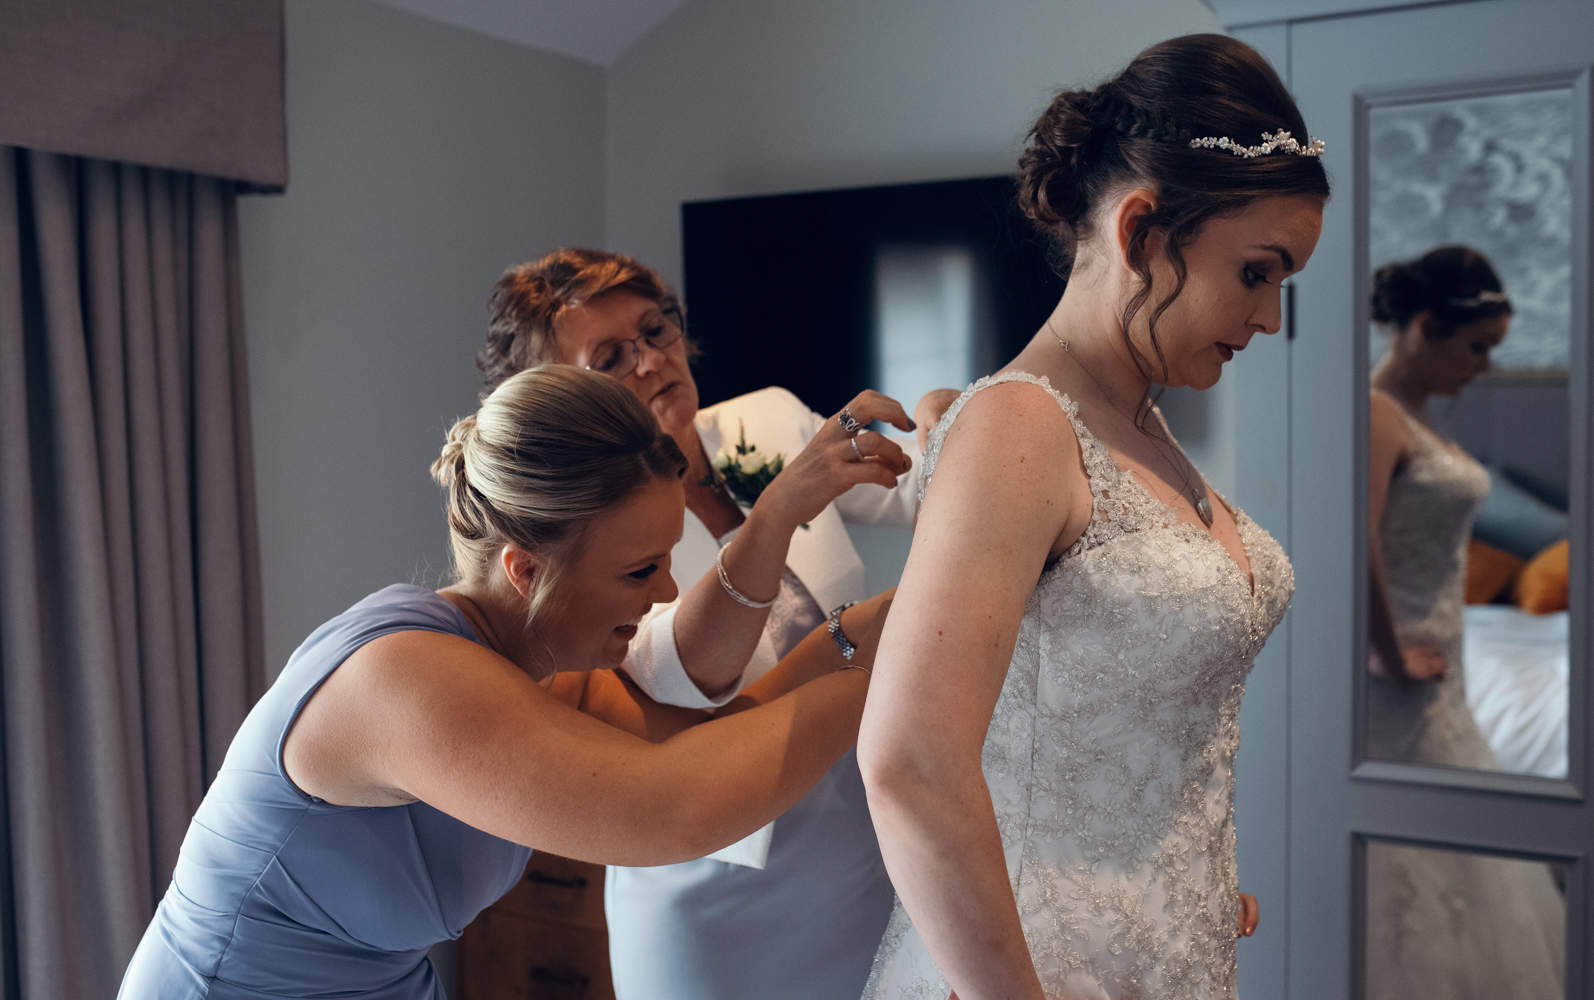 A bride bring helped into her wedding dress